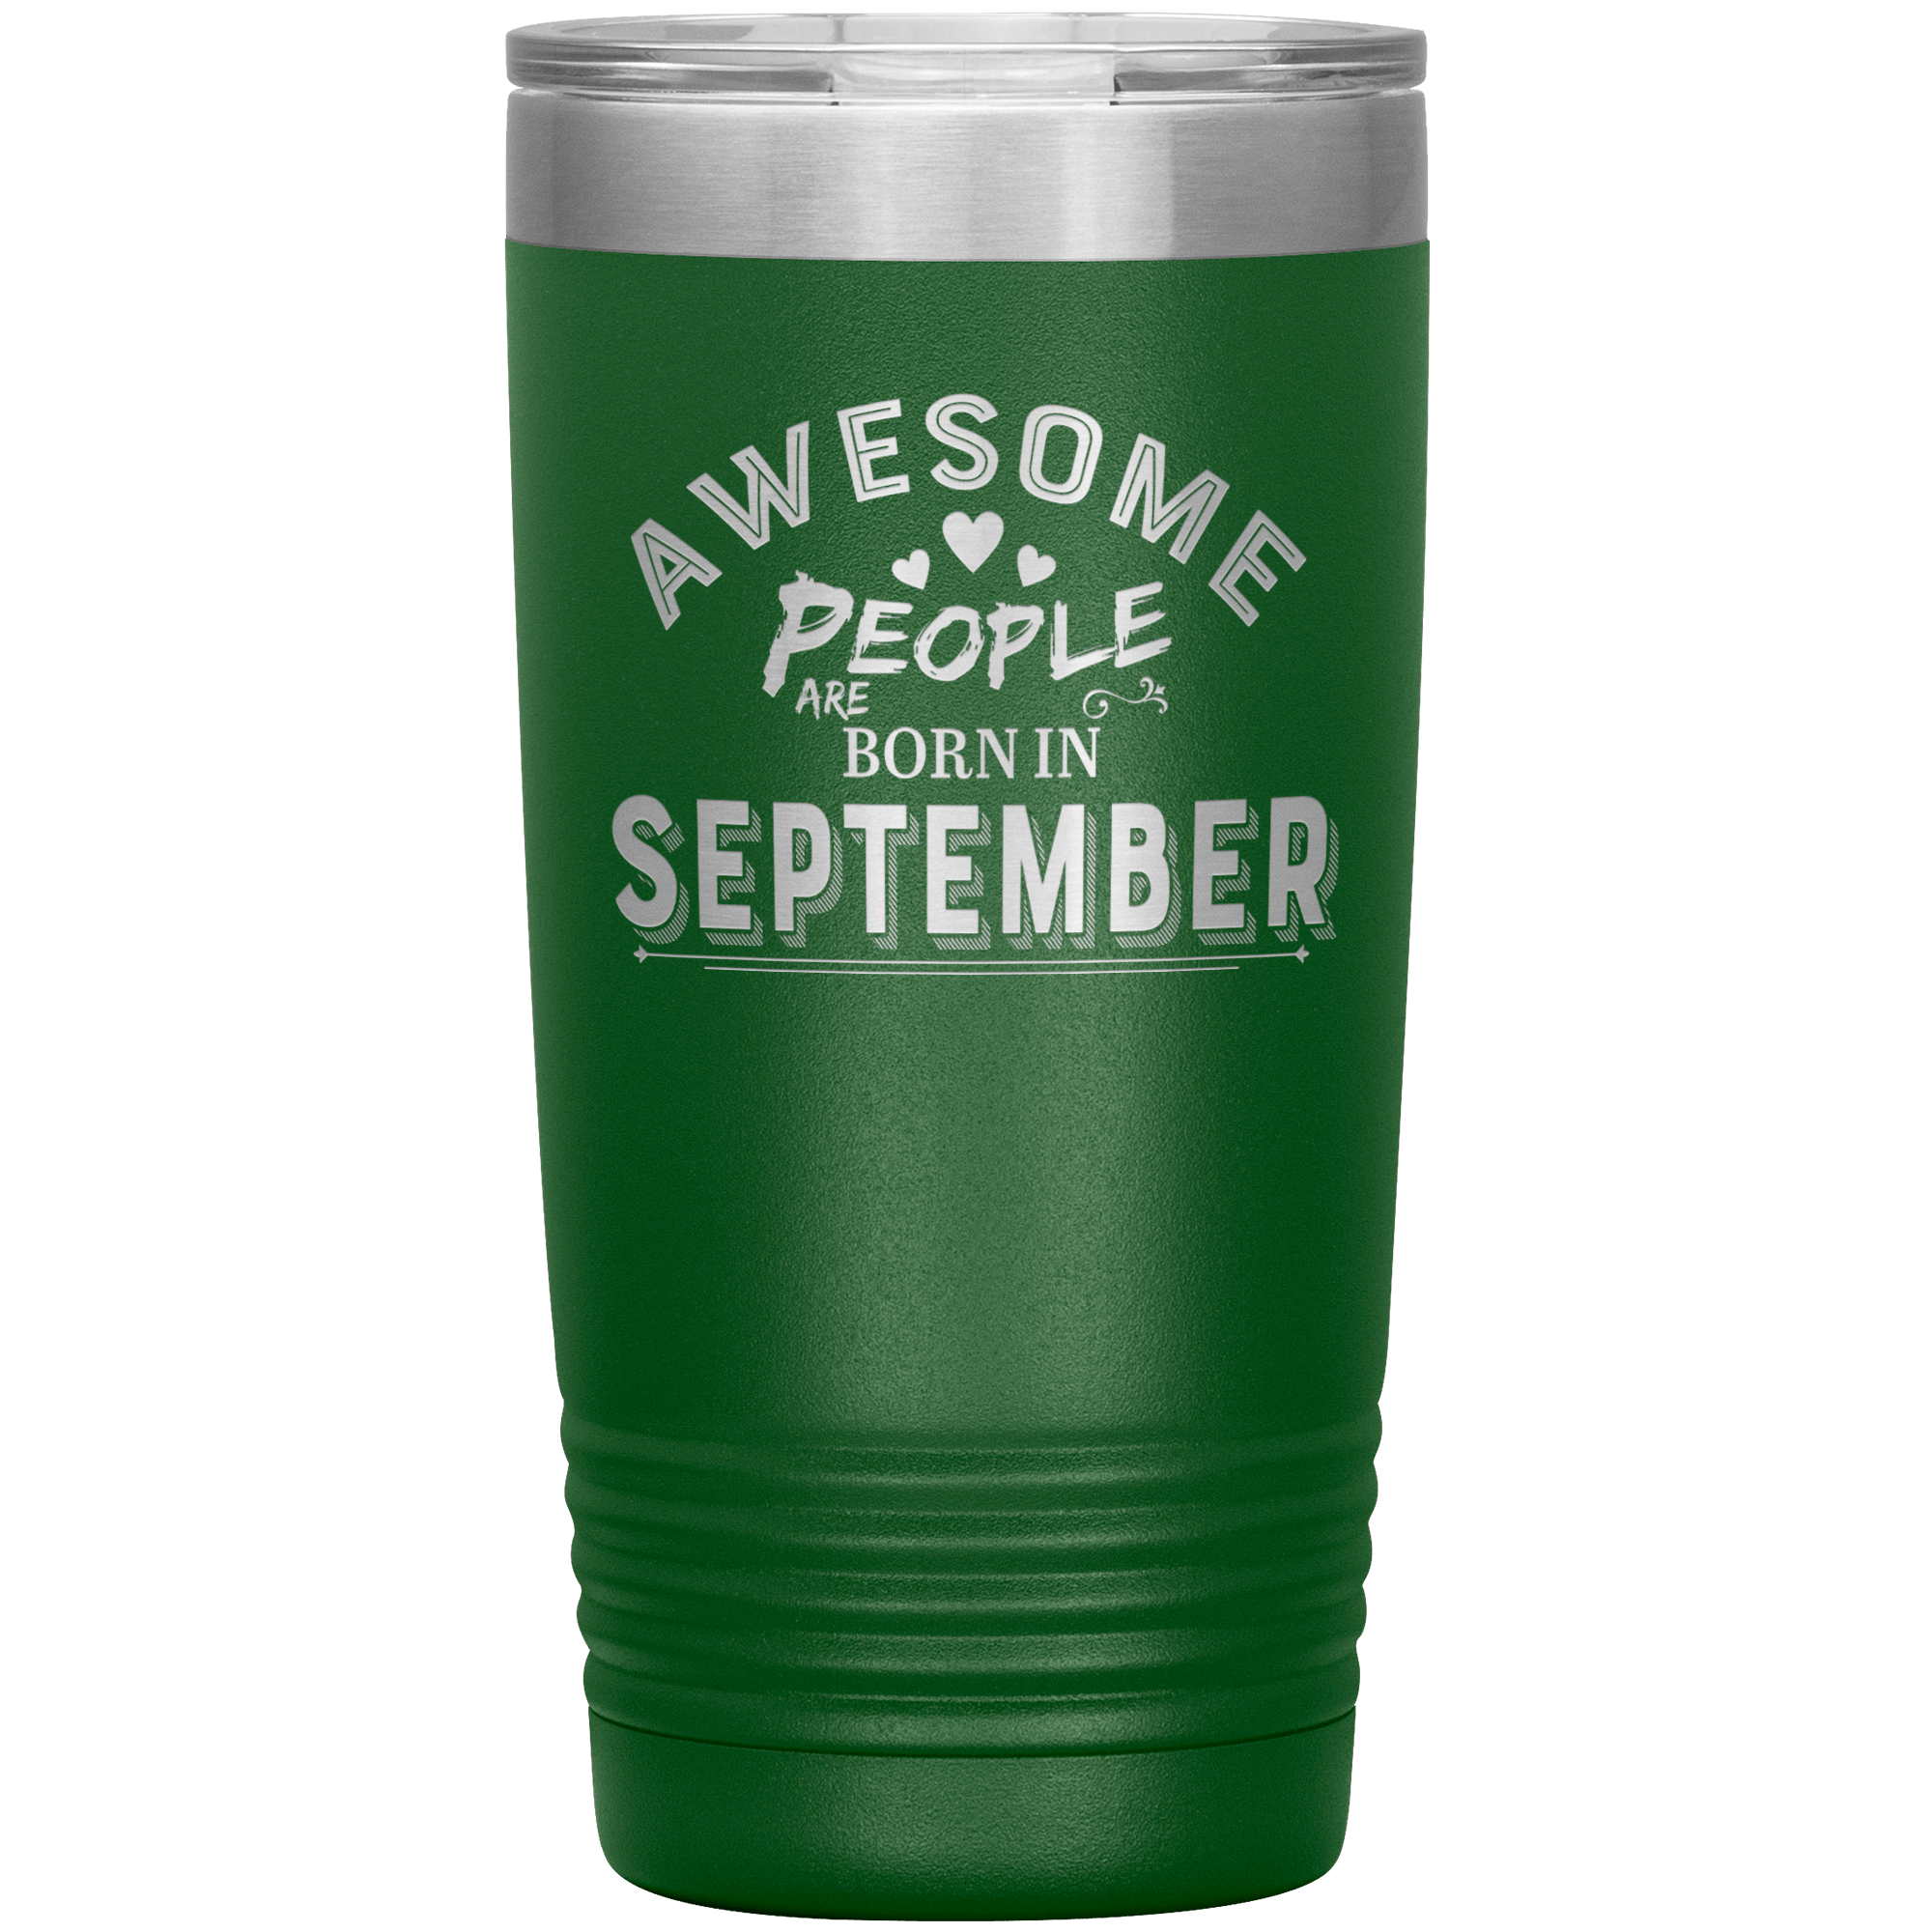 "AWESOME PEOPLE ARE BORN IN SEPTEMBER" Tumbler